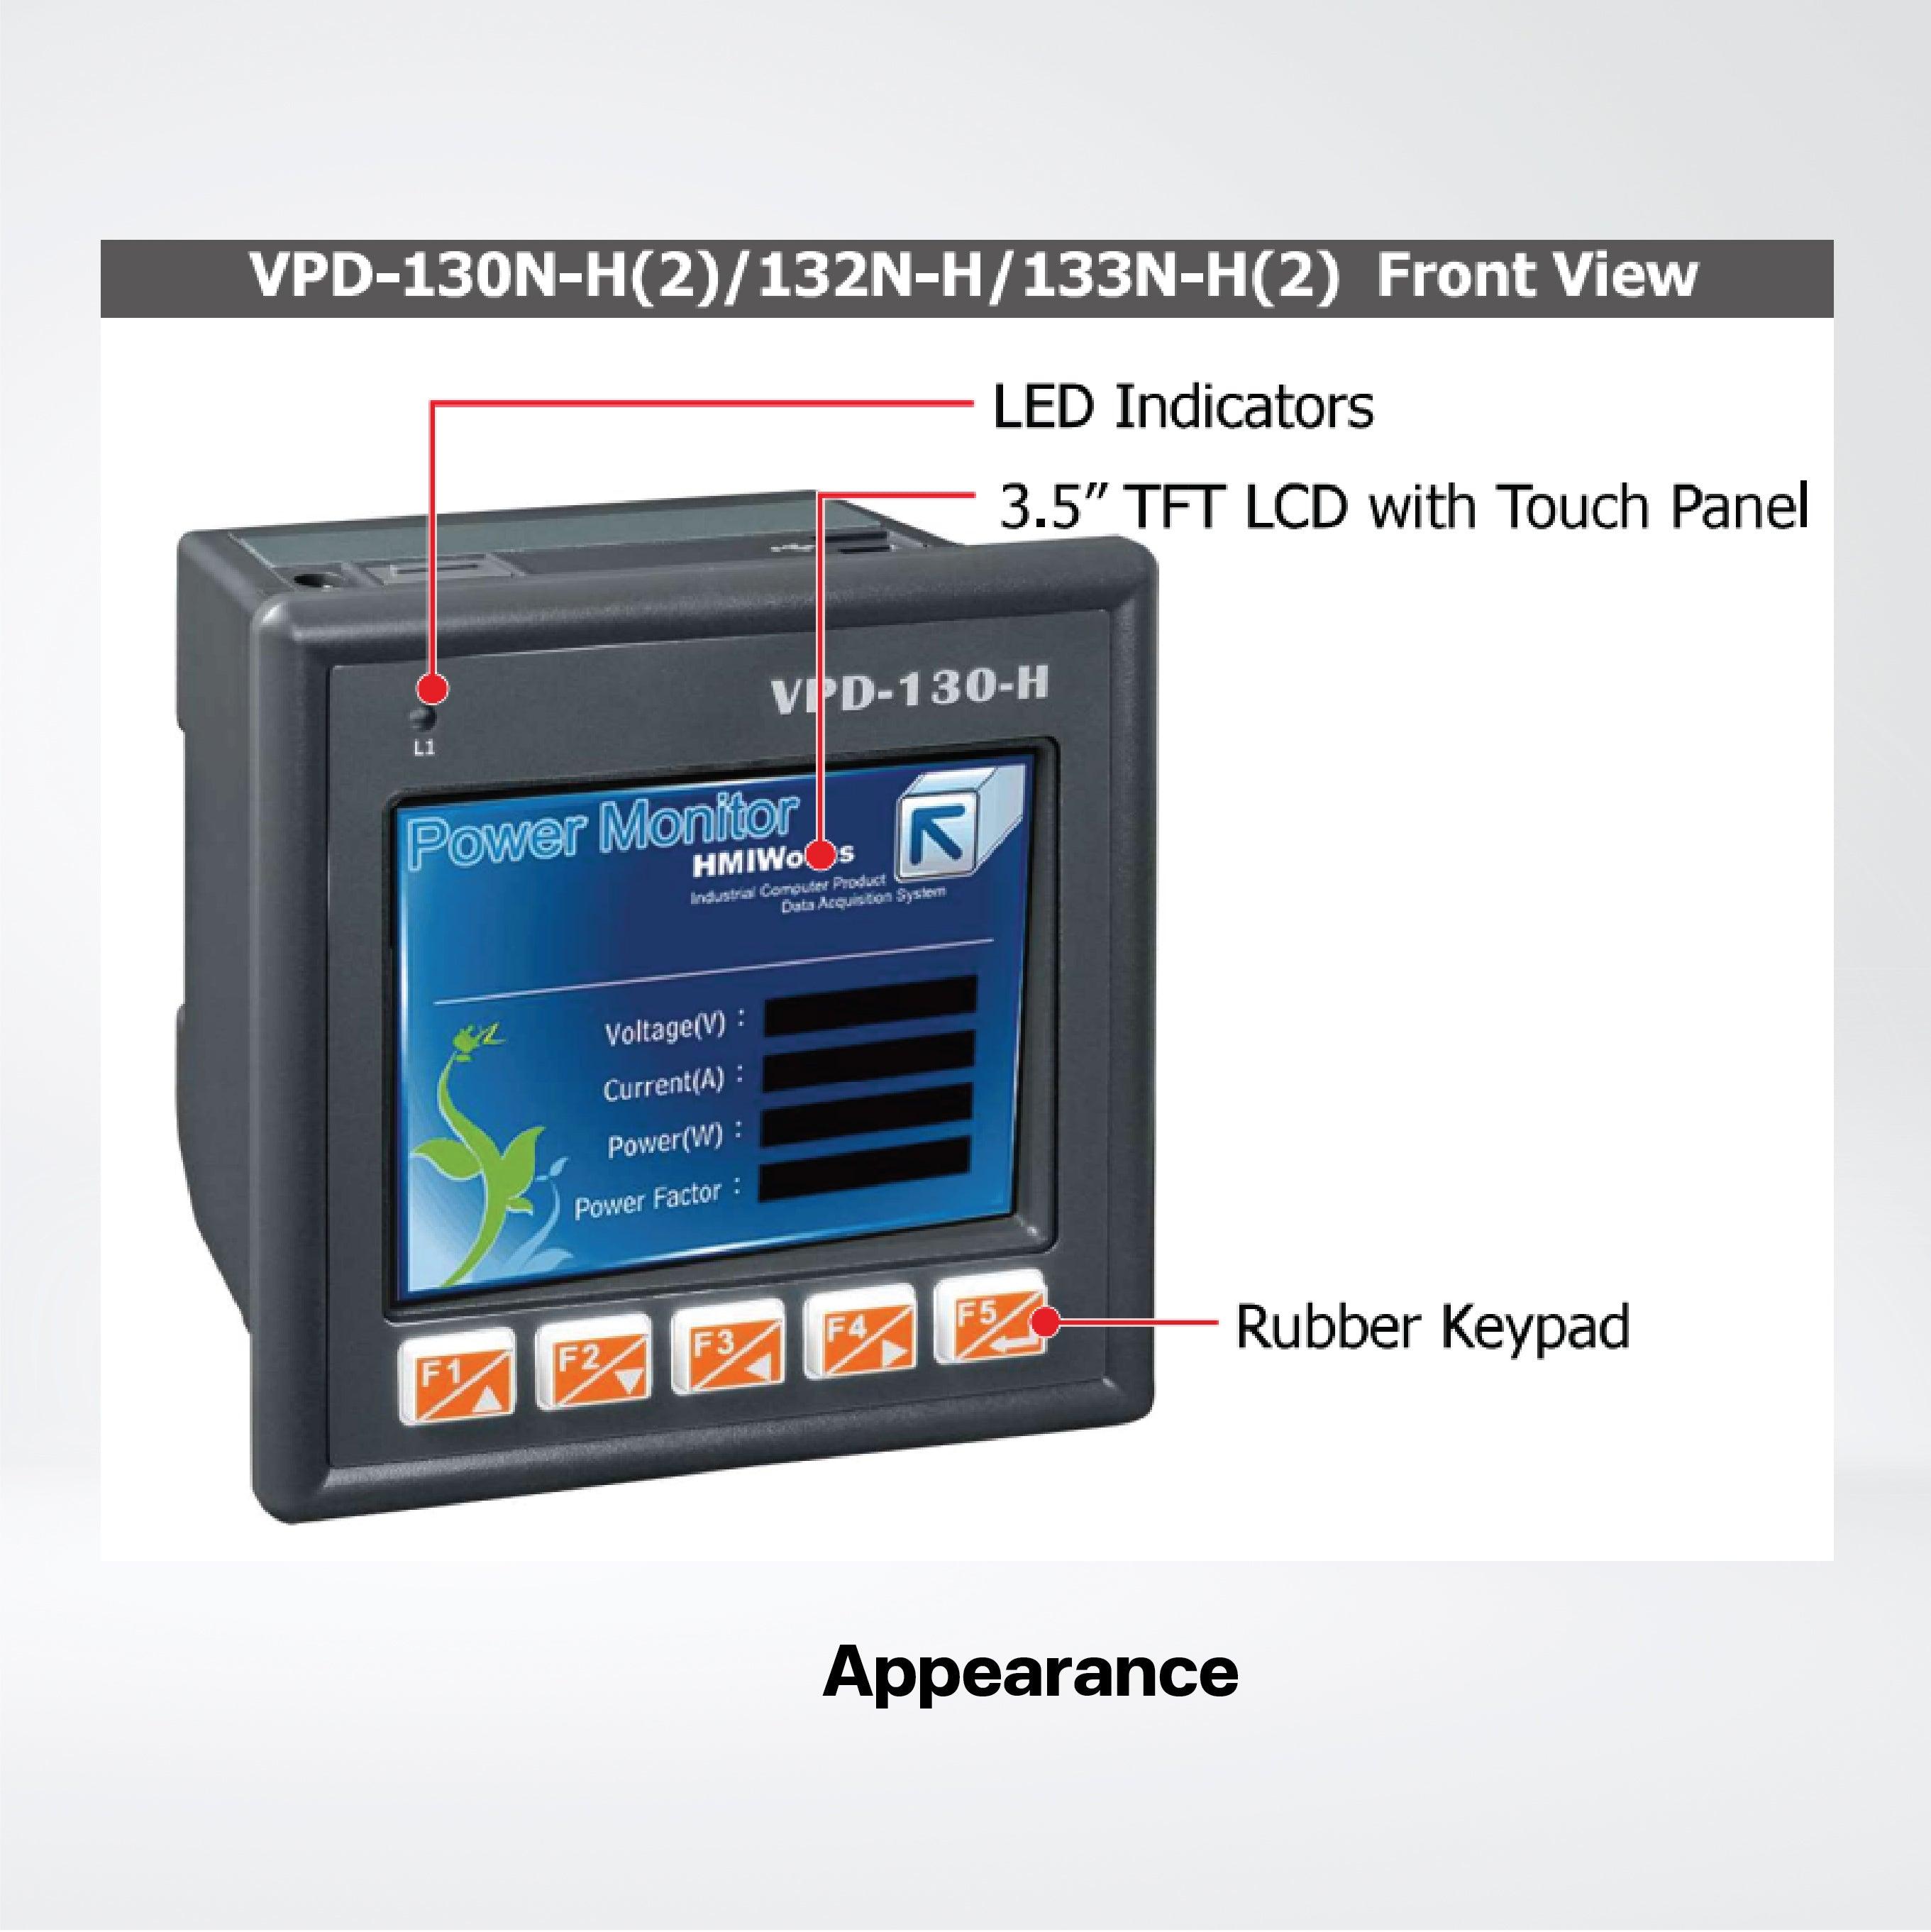 VPD-130-H 3.5" Touch HMI Device with 1 x RS-232/RS-485 and Rubber Keypad - Riverplus